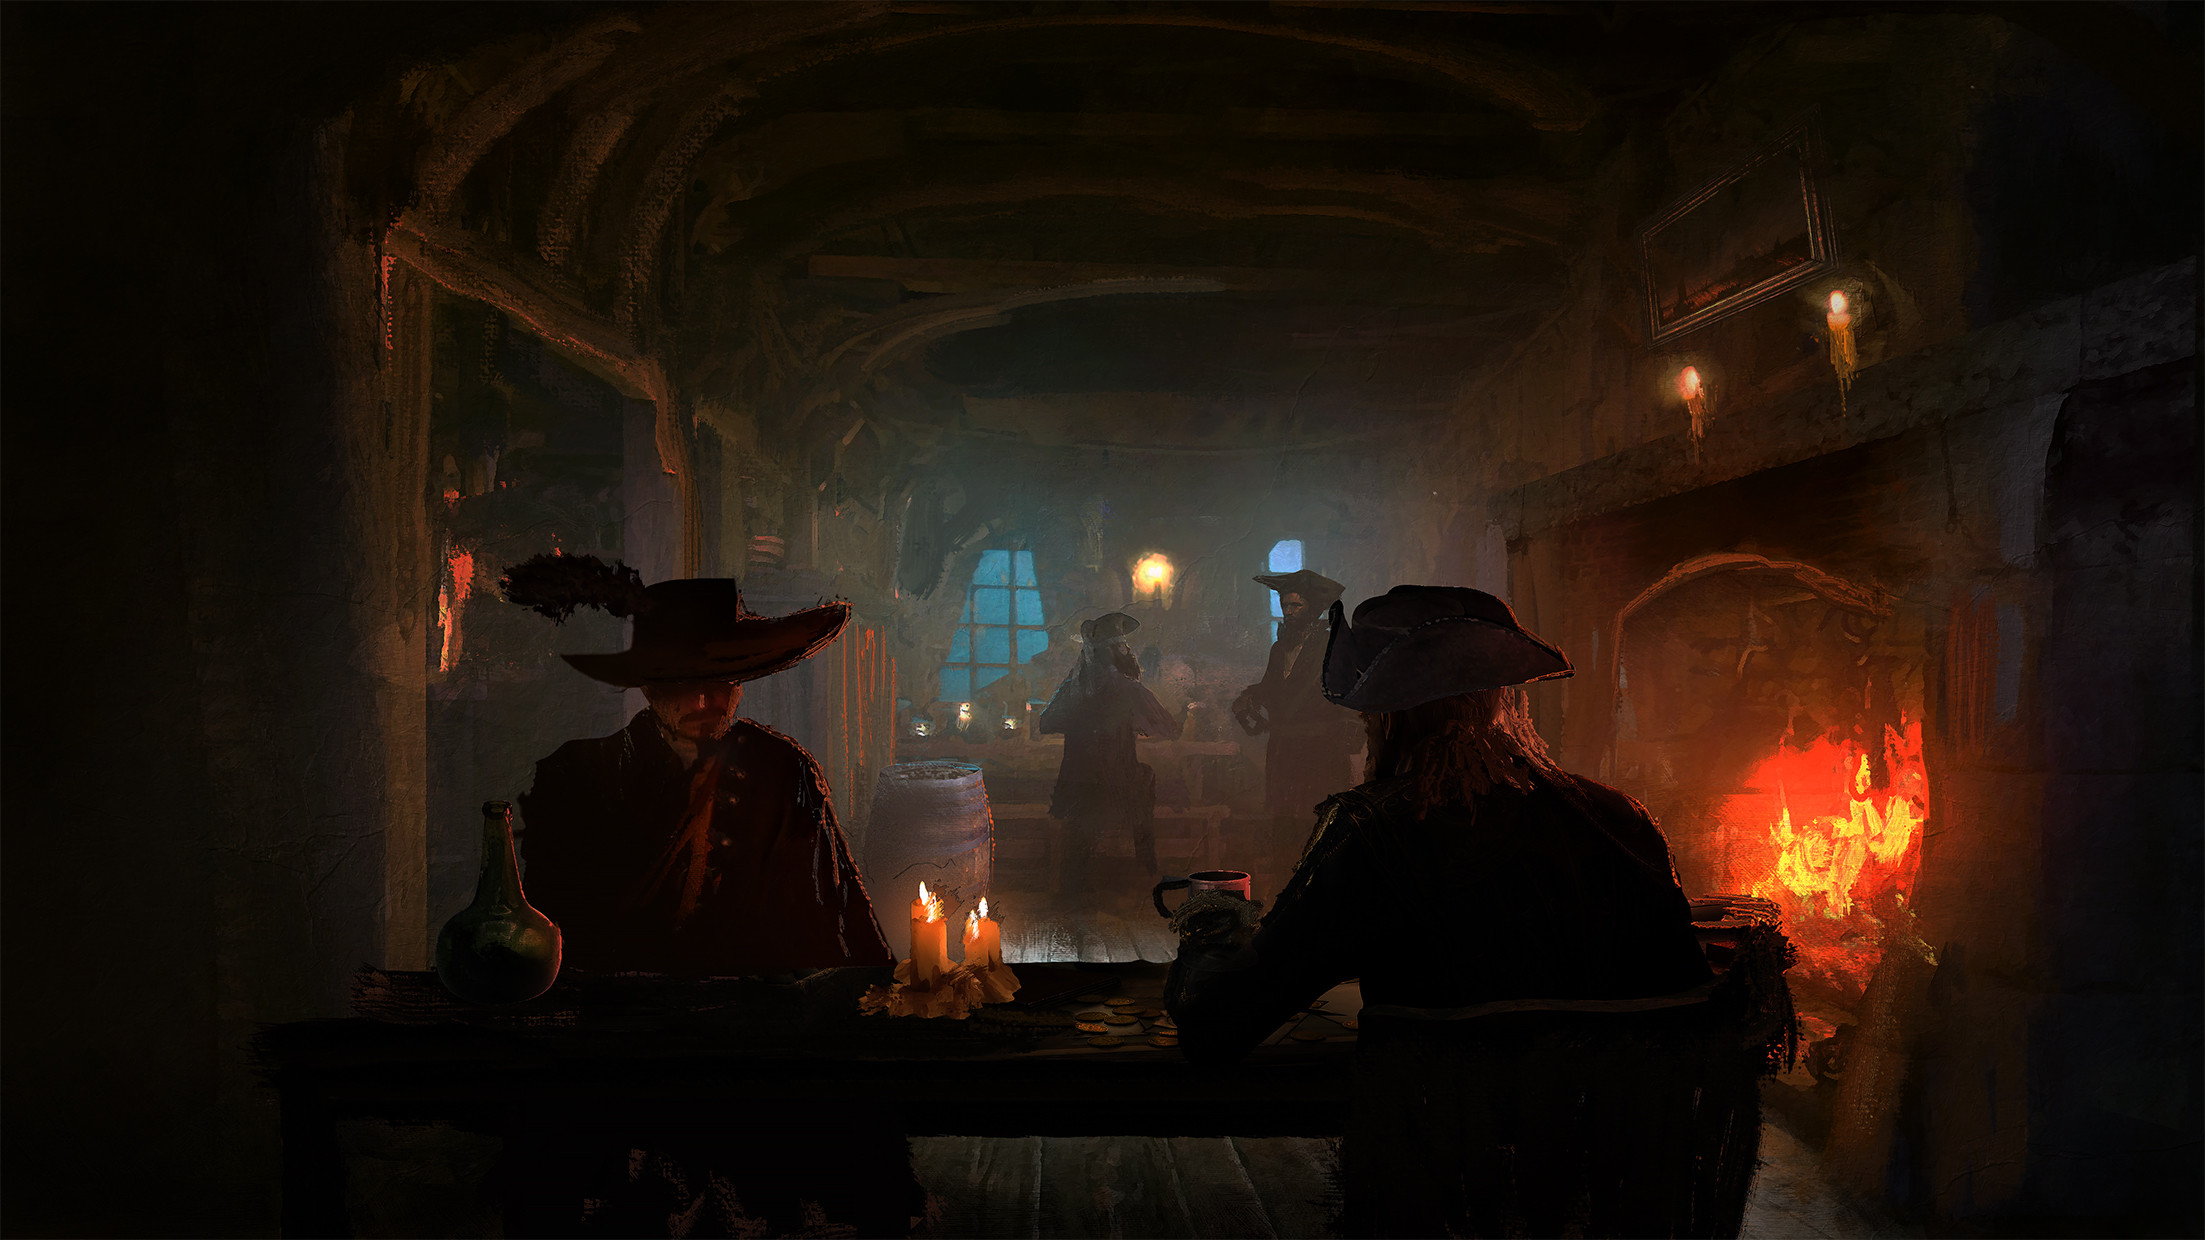 Stories in the Tavern